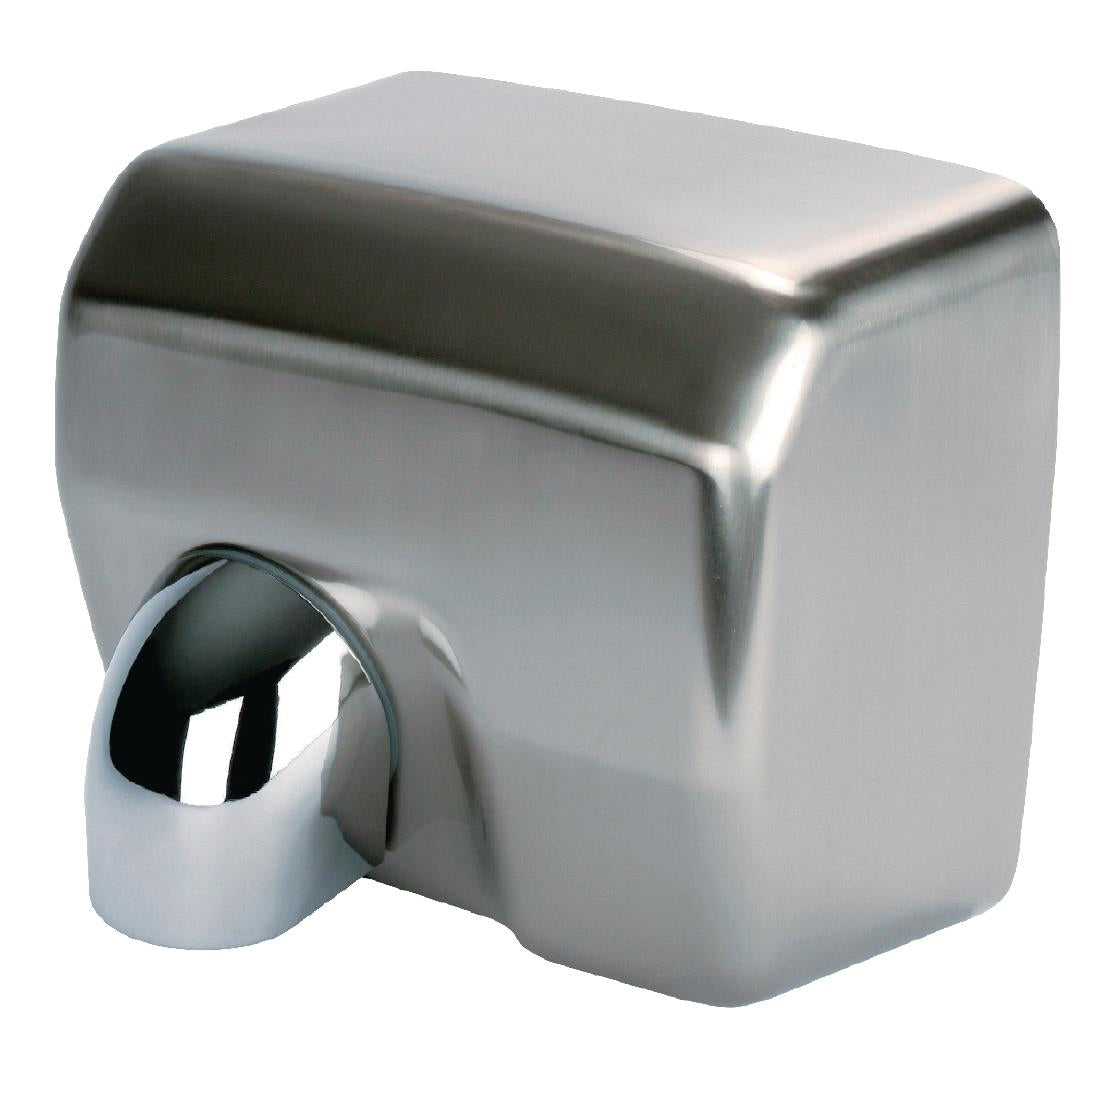 GD847 Jantex Automatic Hand Dryer JD Catering Equipment Solutions Ltd